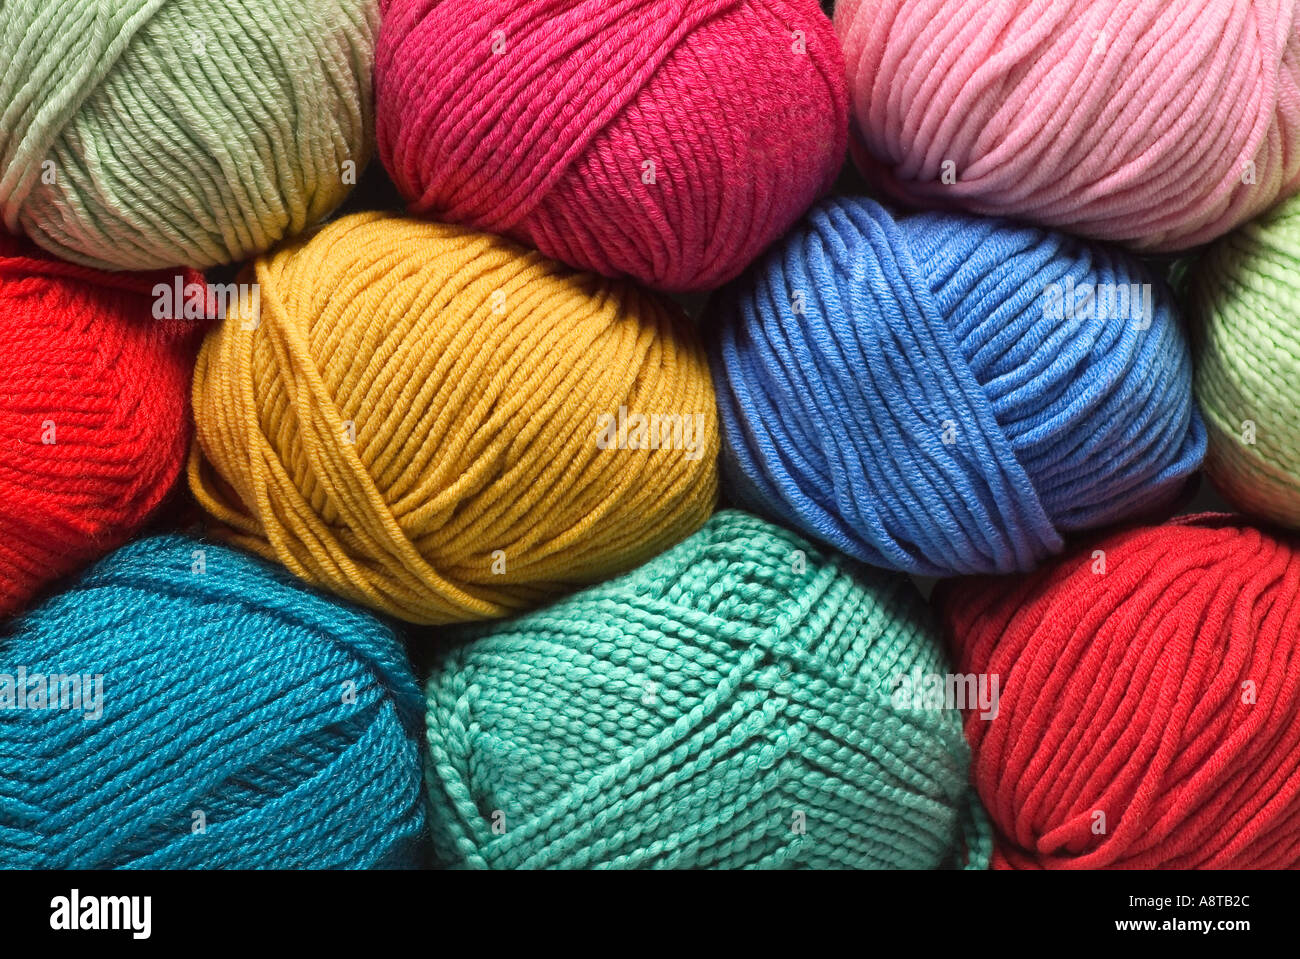 Balls of Colorful Yarn cotton wool synthetic fibers Stock Photo